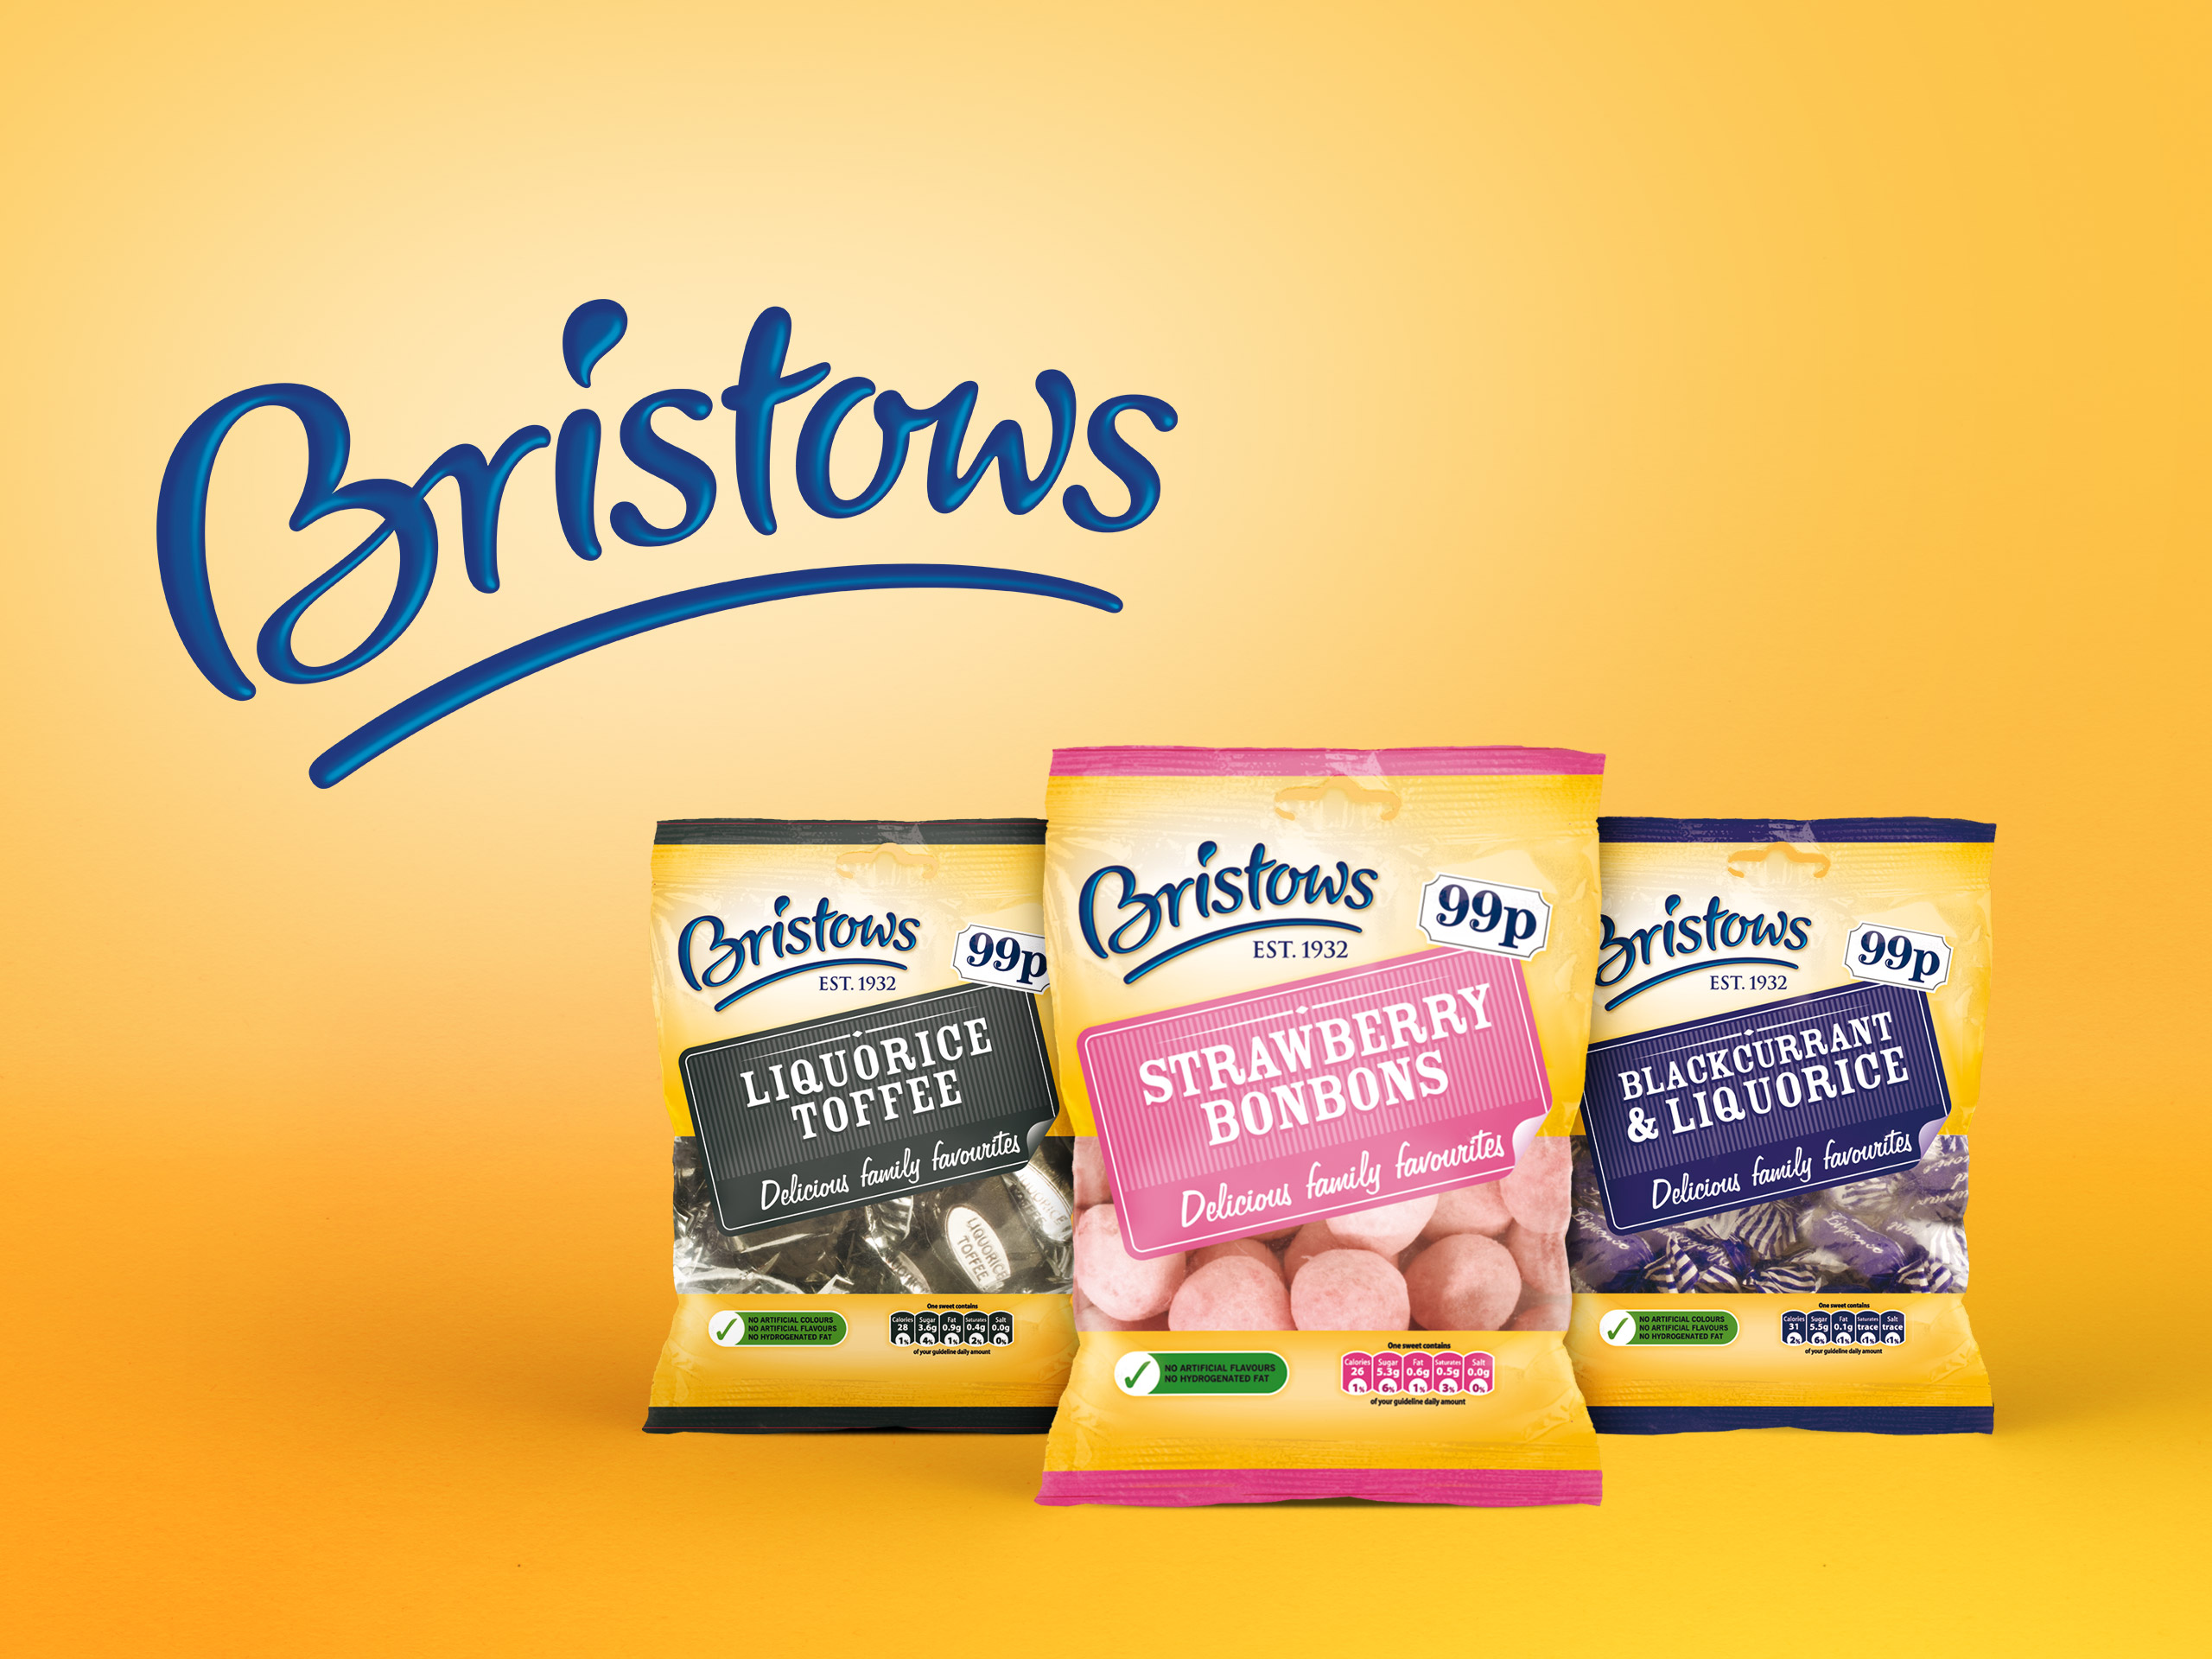 Bristows - Brand Identity, Logo and Packaging Design